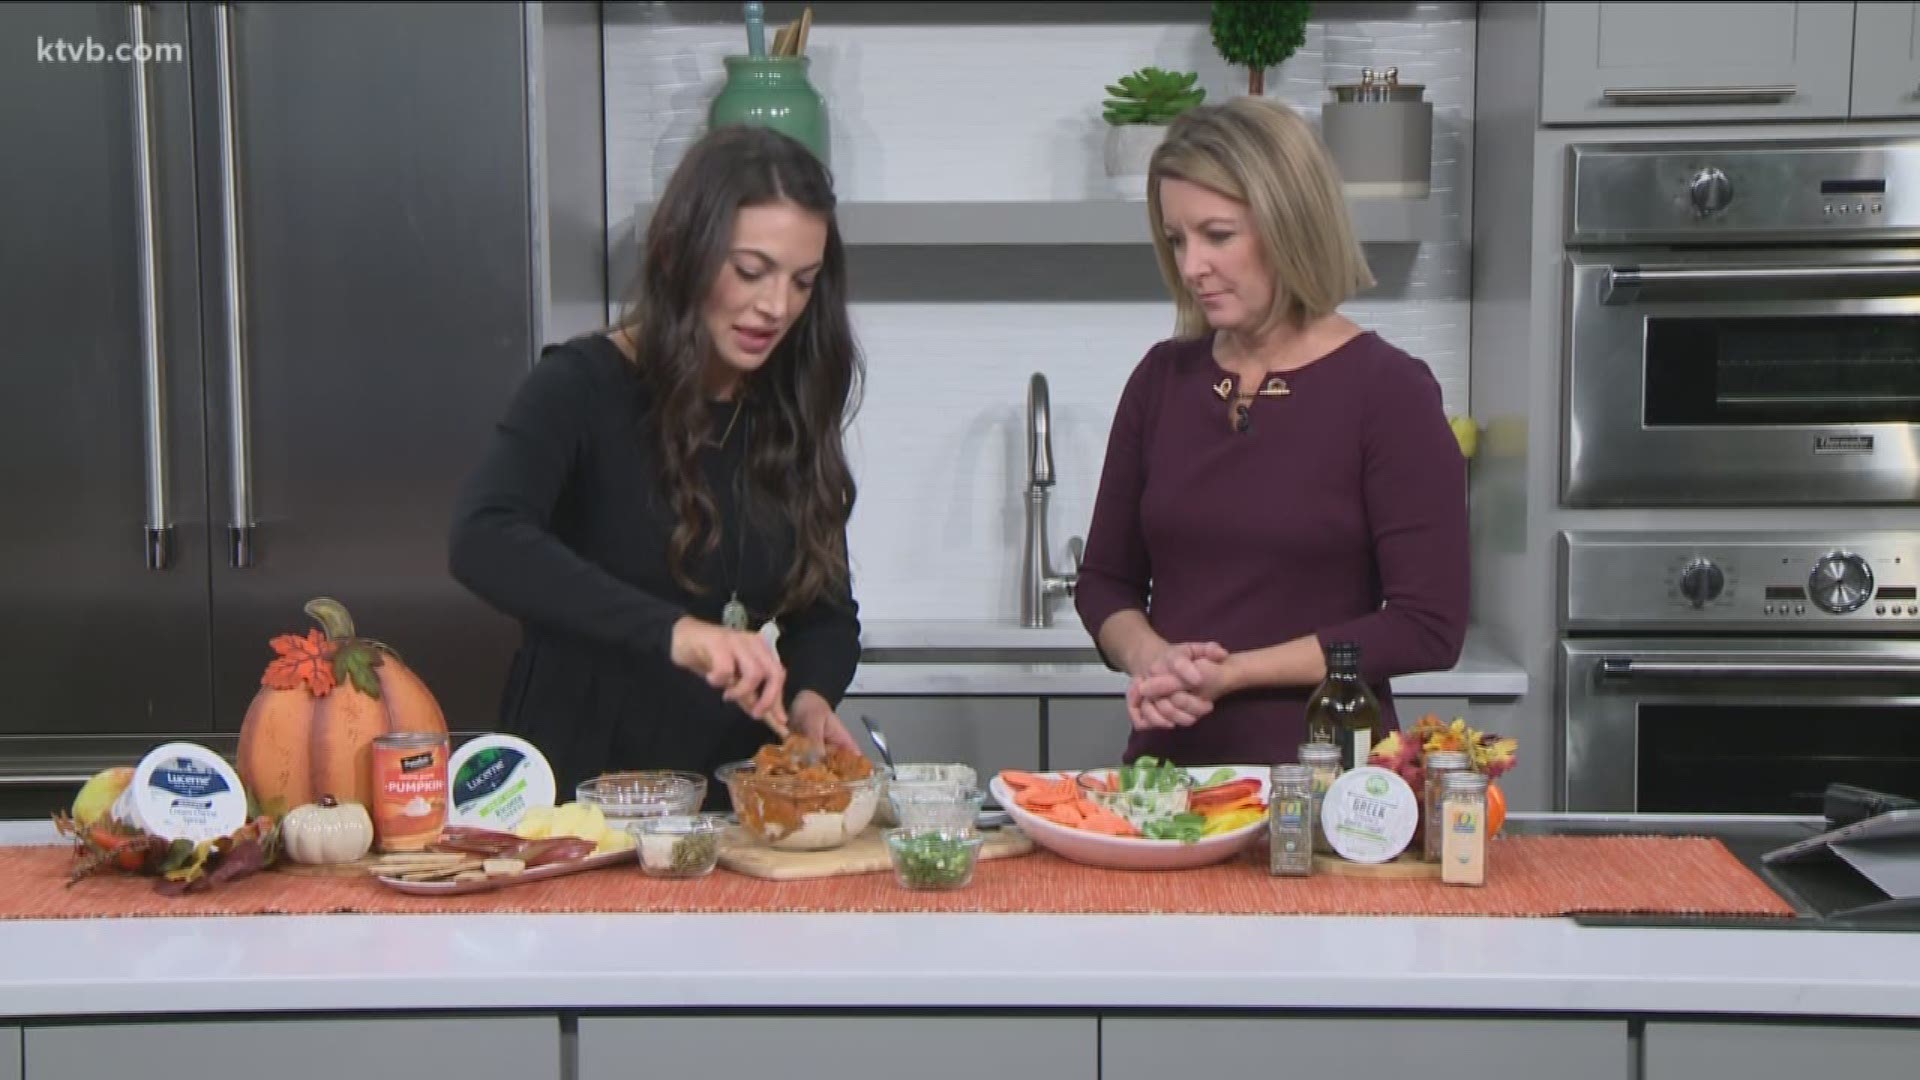 Dietitian Molly Tevis shows us some quick dips with nutritious ingredients.